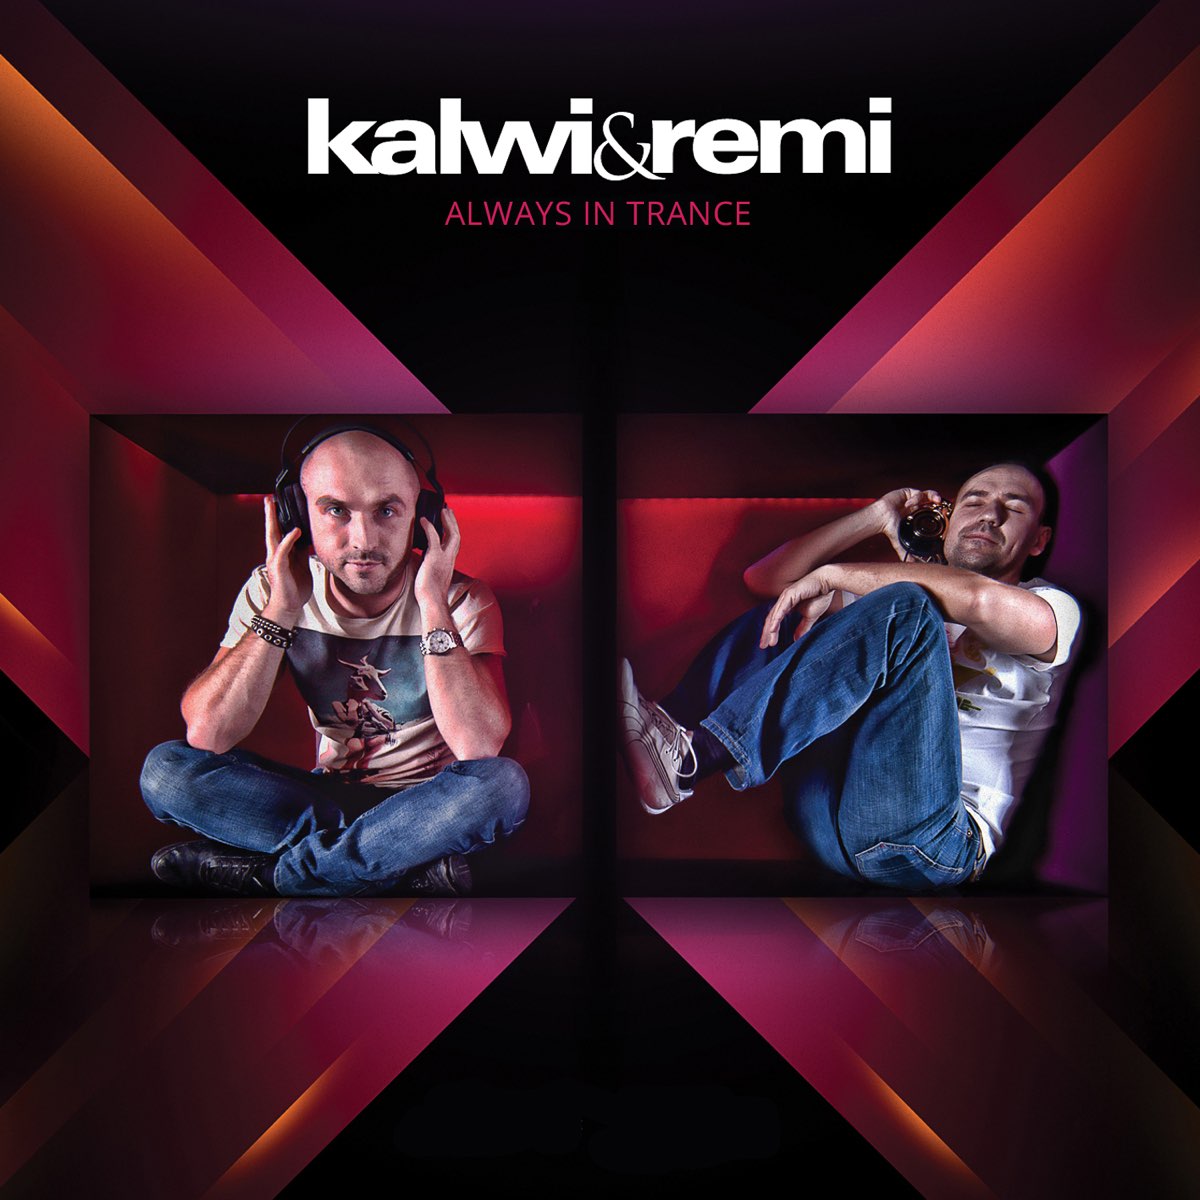 Feat remy. Kalwi Remi explosion. Explosion theo Remix. Kalwi & Remi - explosion (theo Remix). Explosion Kalwi Remi модели.